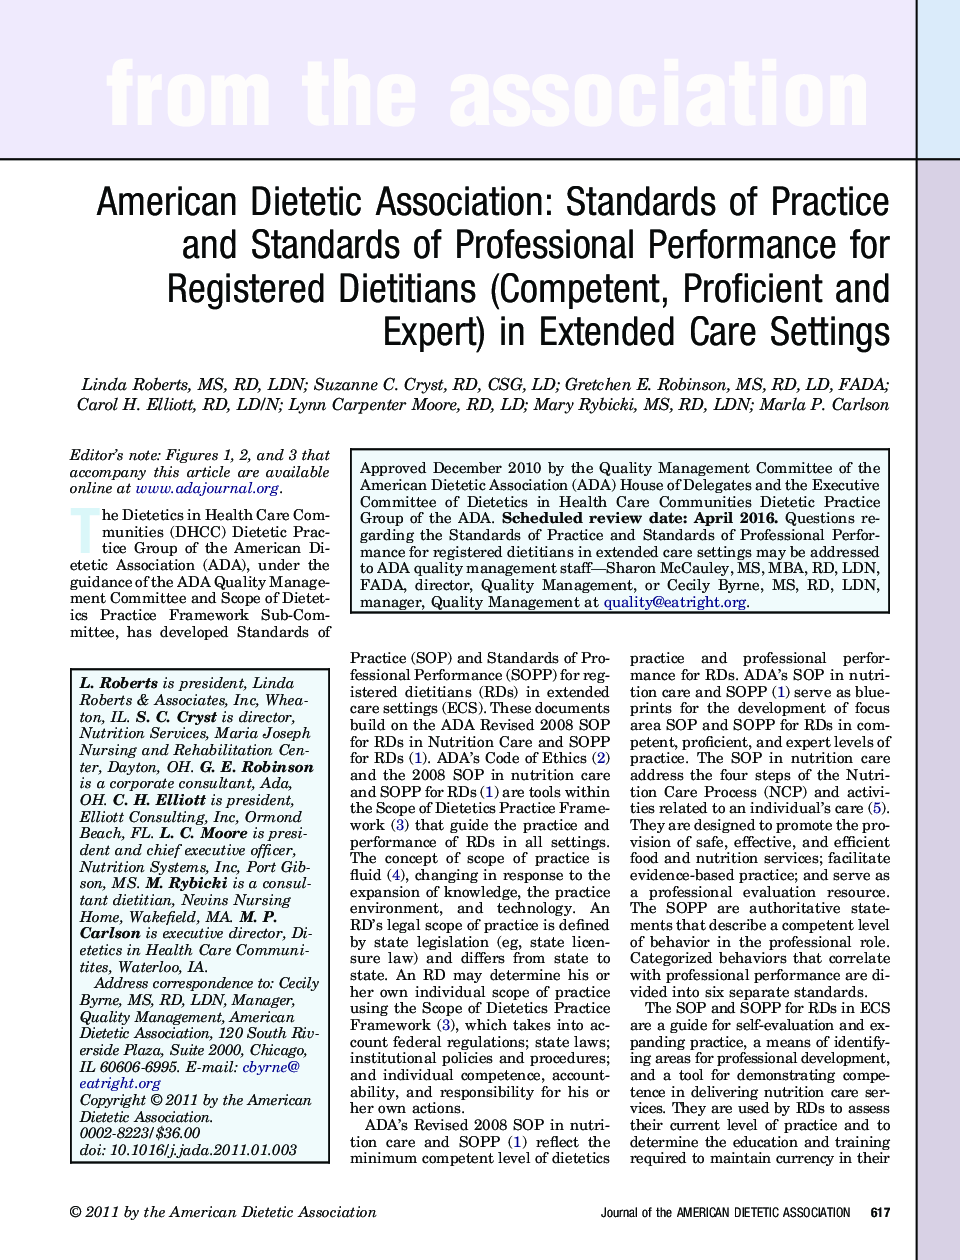 American Dietetic Association: Standards of Practice and Standards of Professional Performance for Registered Dietitians (Competent, Proficient, and Expert) in Extended Care Settings